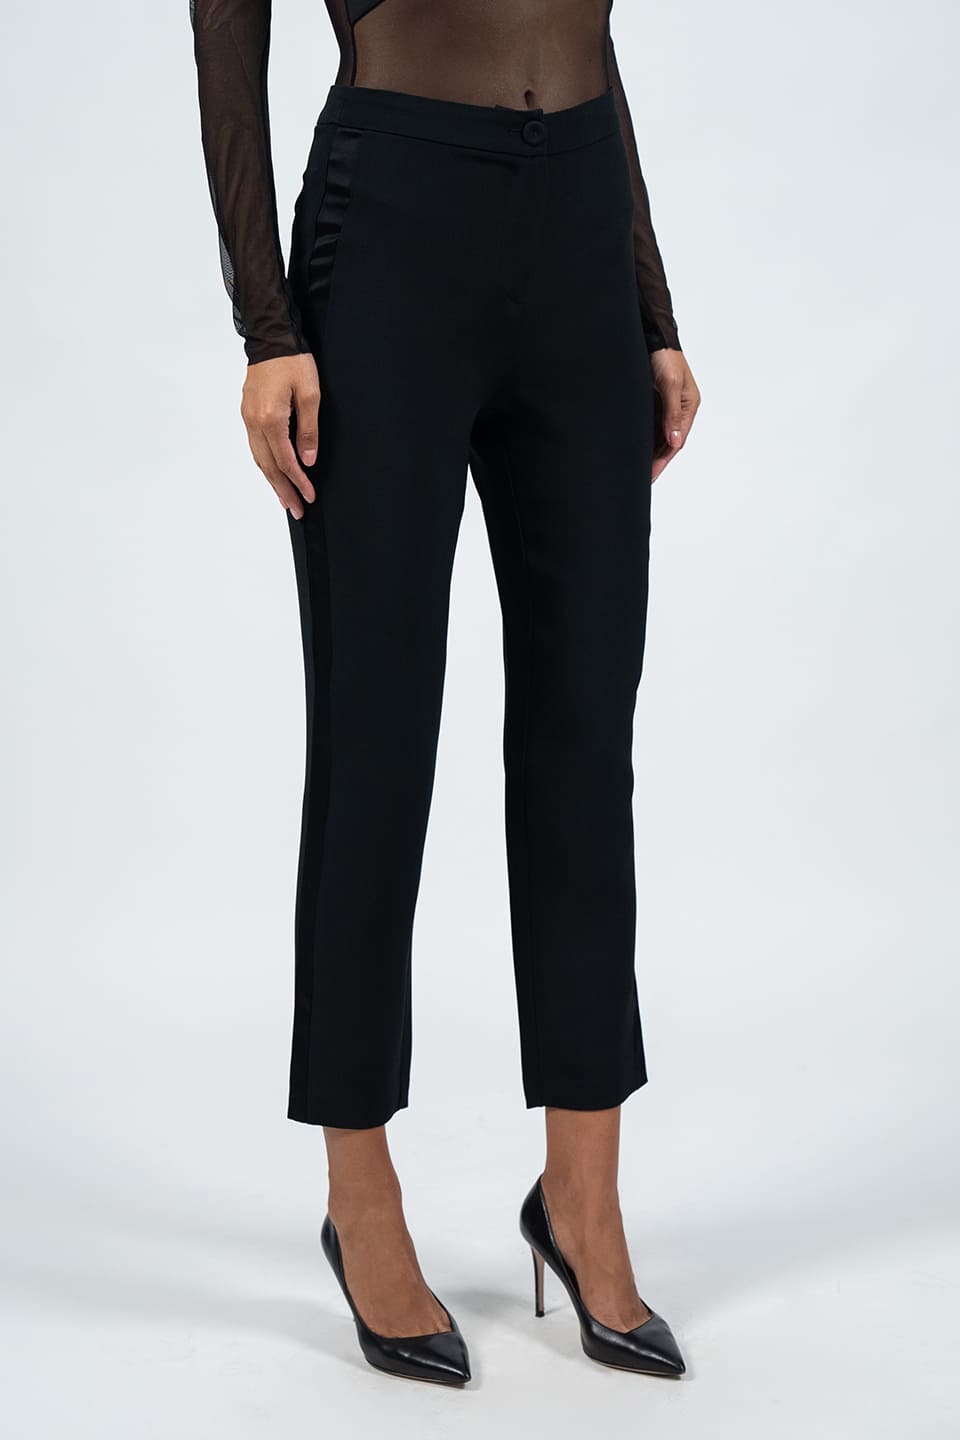 Thumbnail for Product gallery 4, Black Satin-Trim Trouser